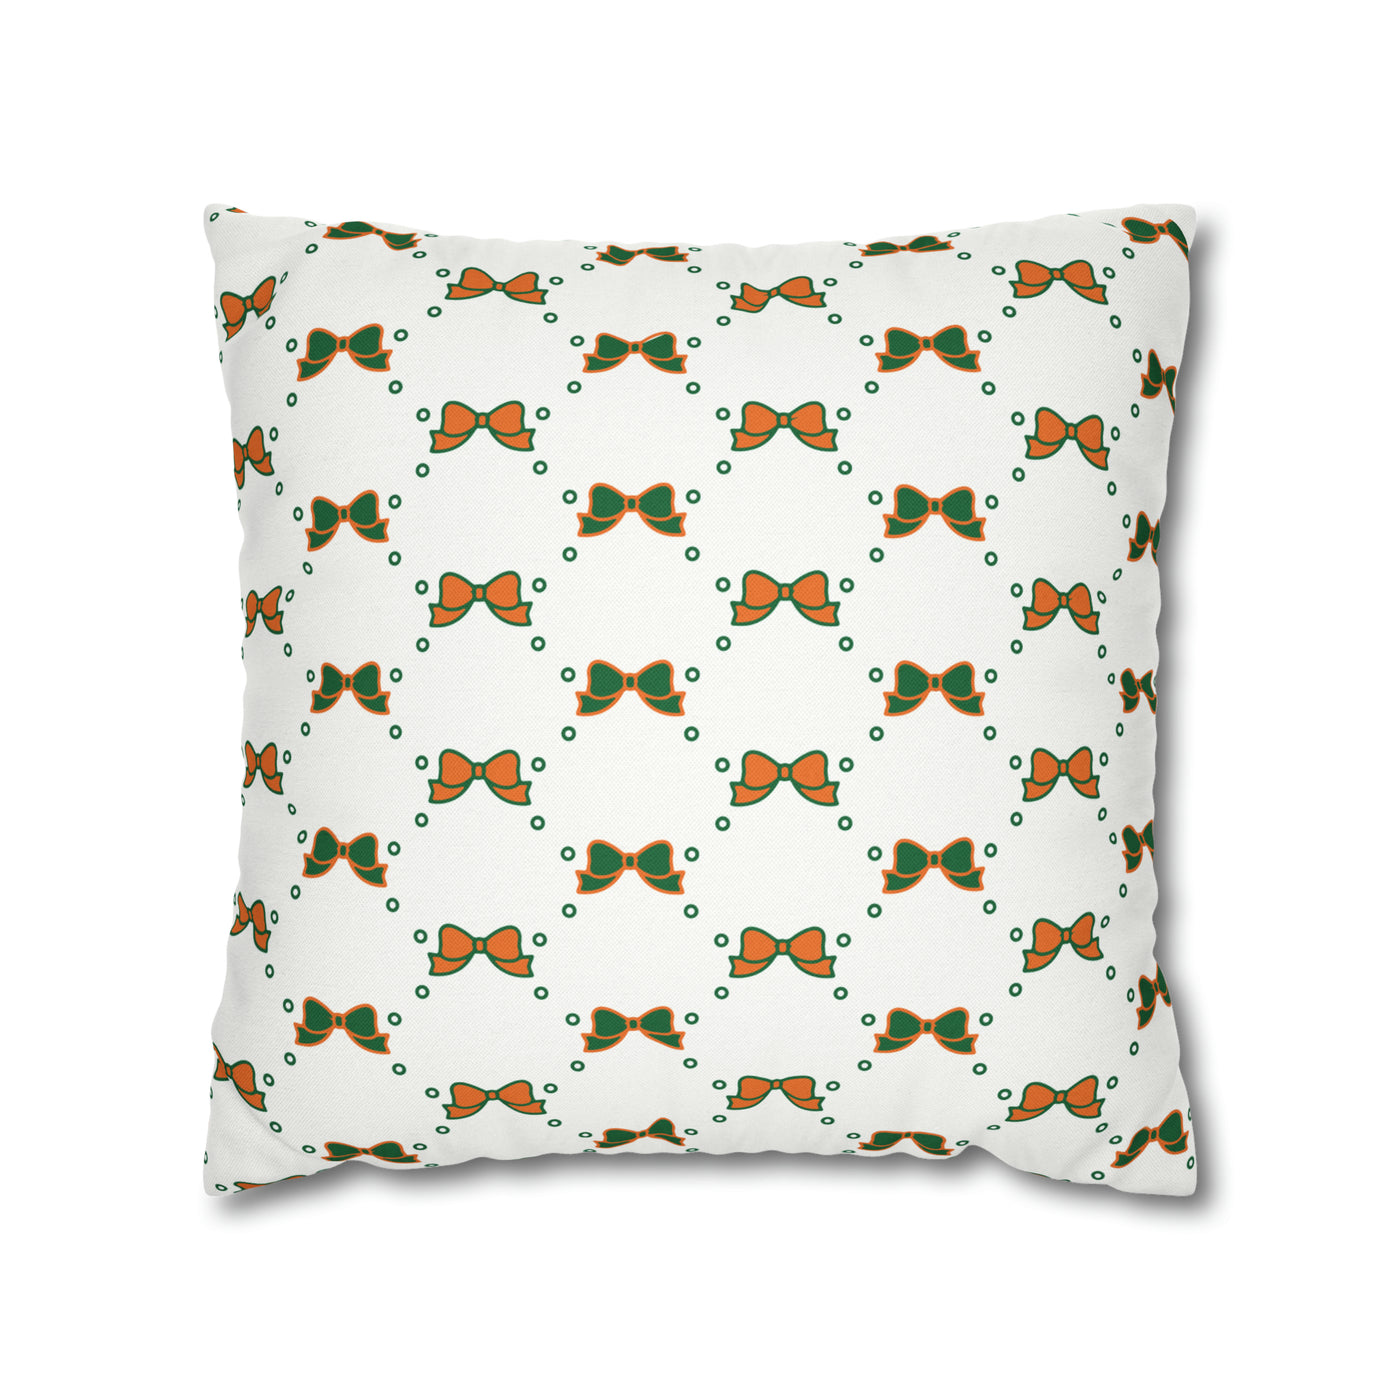 Pretty Little Bow Pillow Cover - Dorm Pillow,Bow Pillow,Bed Party Gift, Acceptance Gift, Camp Gift, Bow Aesthetic, Miami, Orange & Green